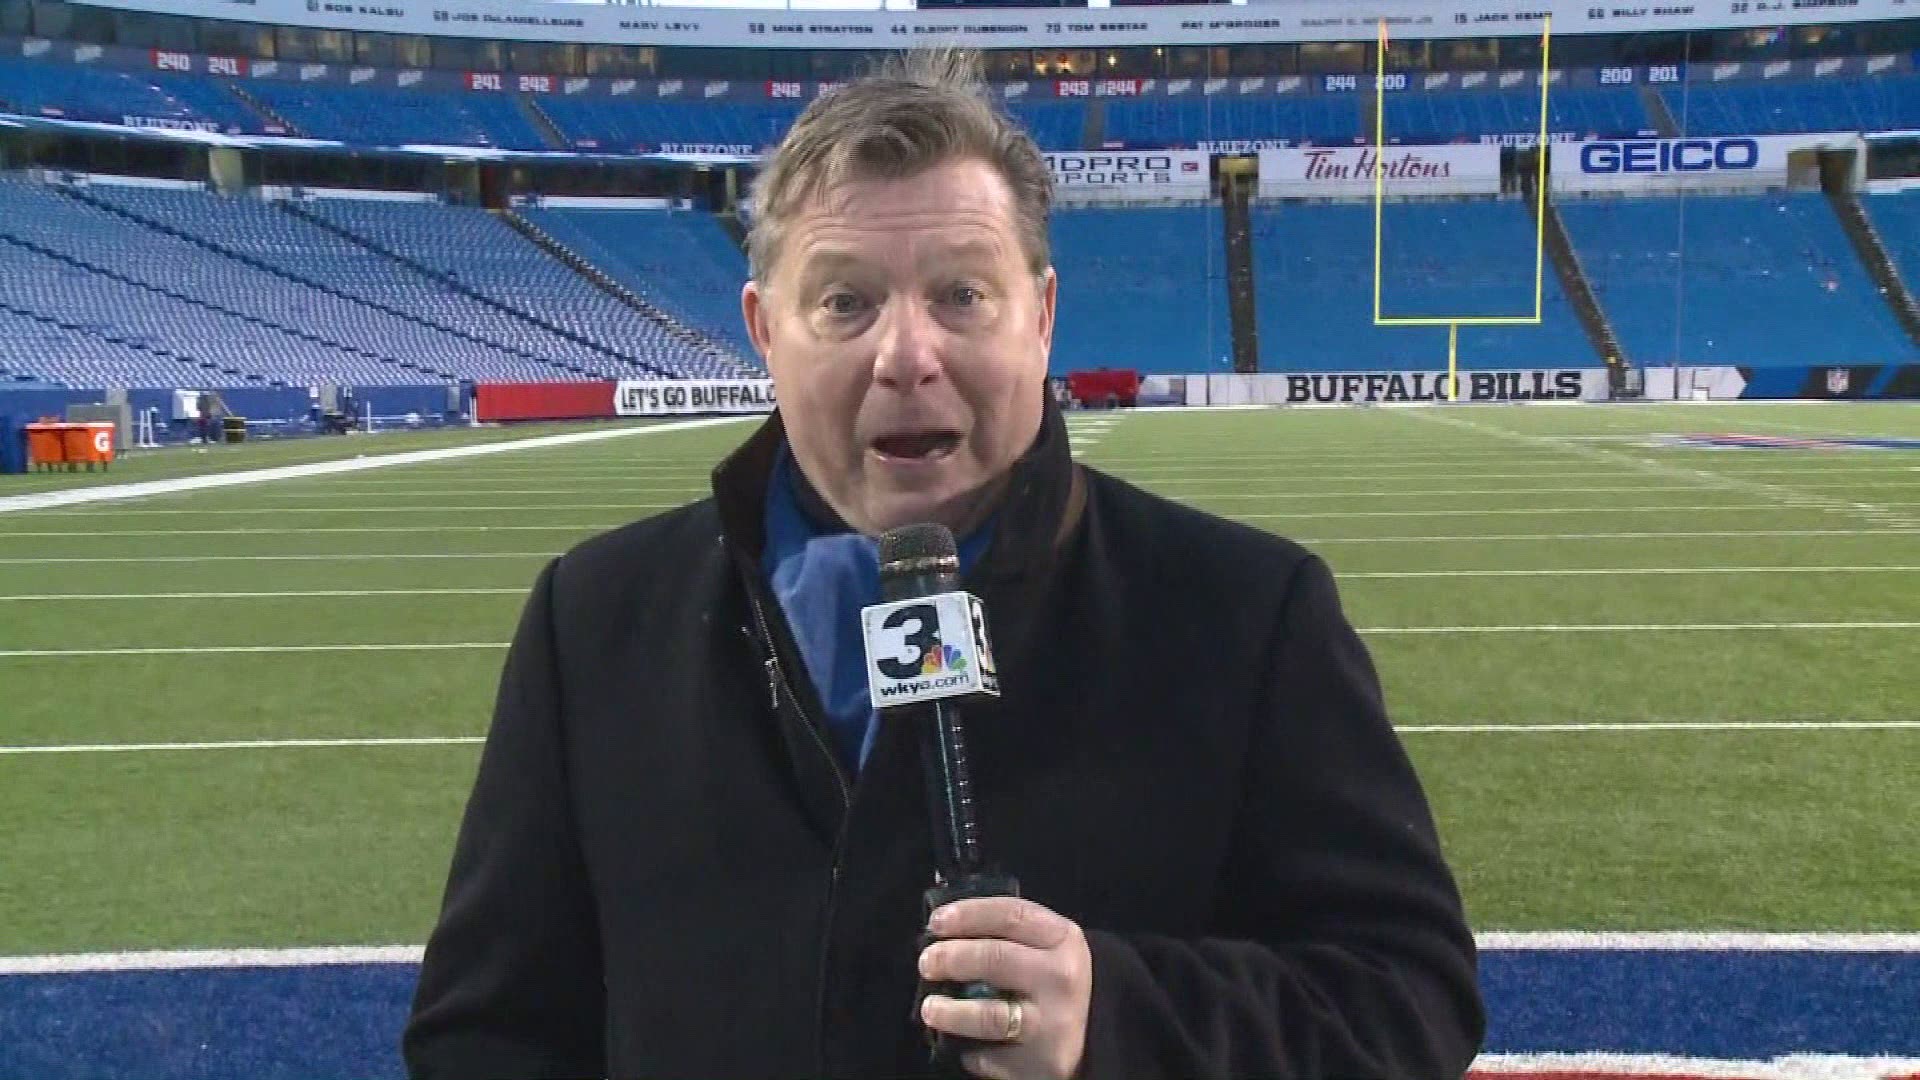 Here is Jimmy's Take for the Browns vs. Bills game on Sunday, December 18.